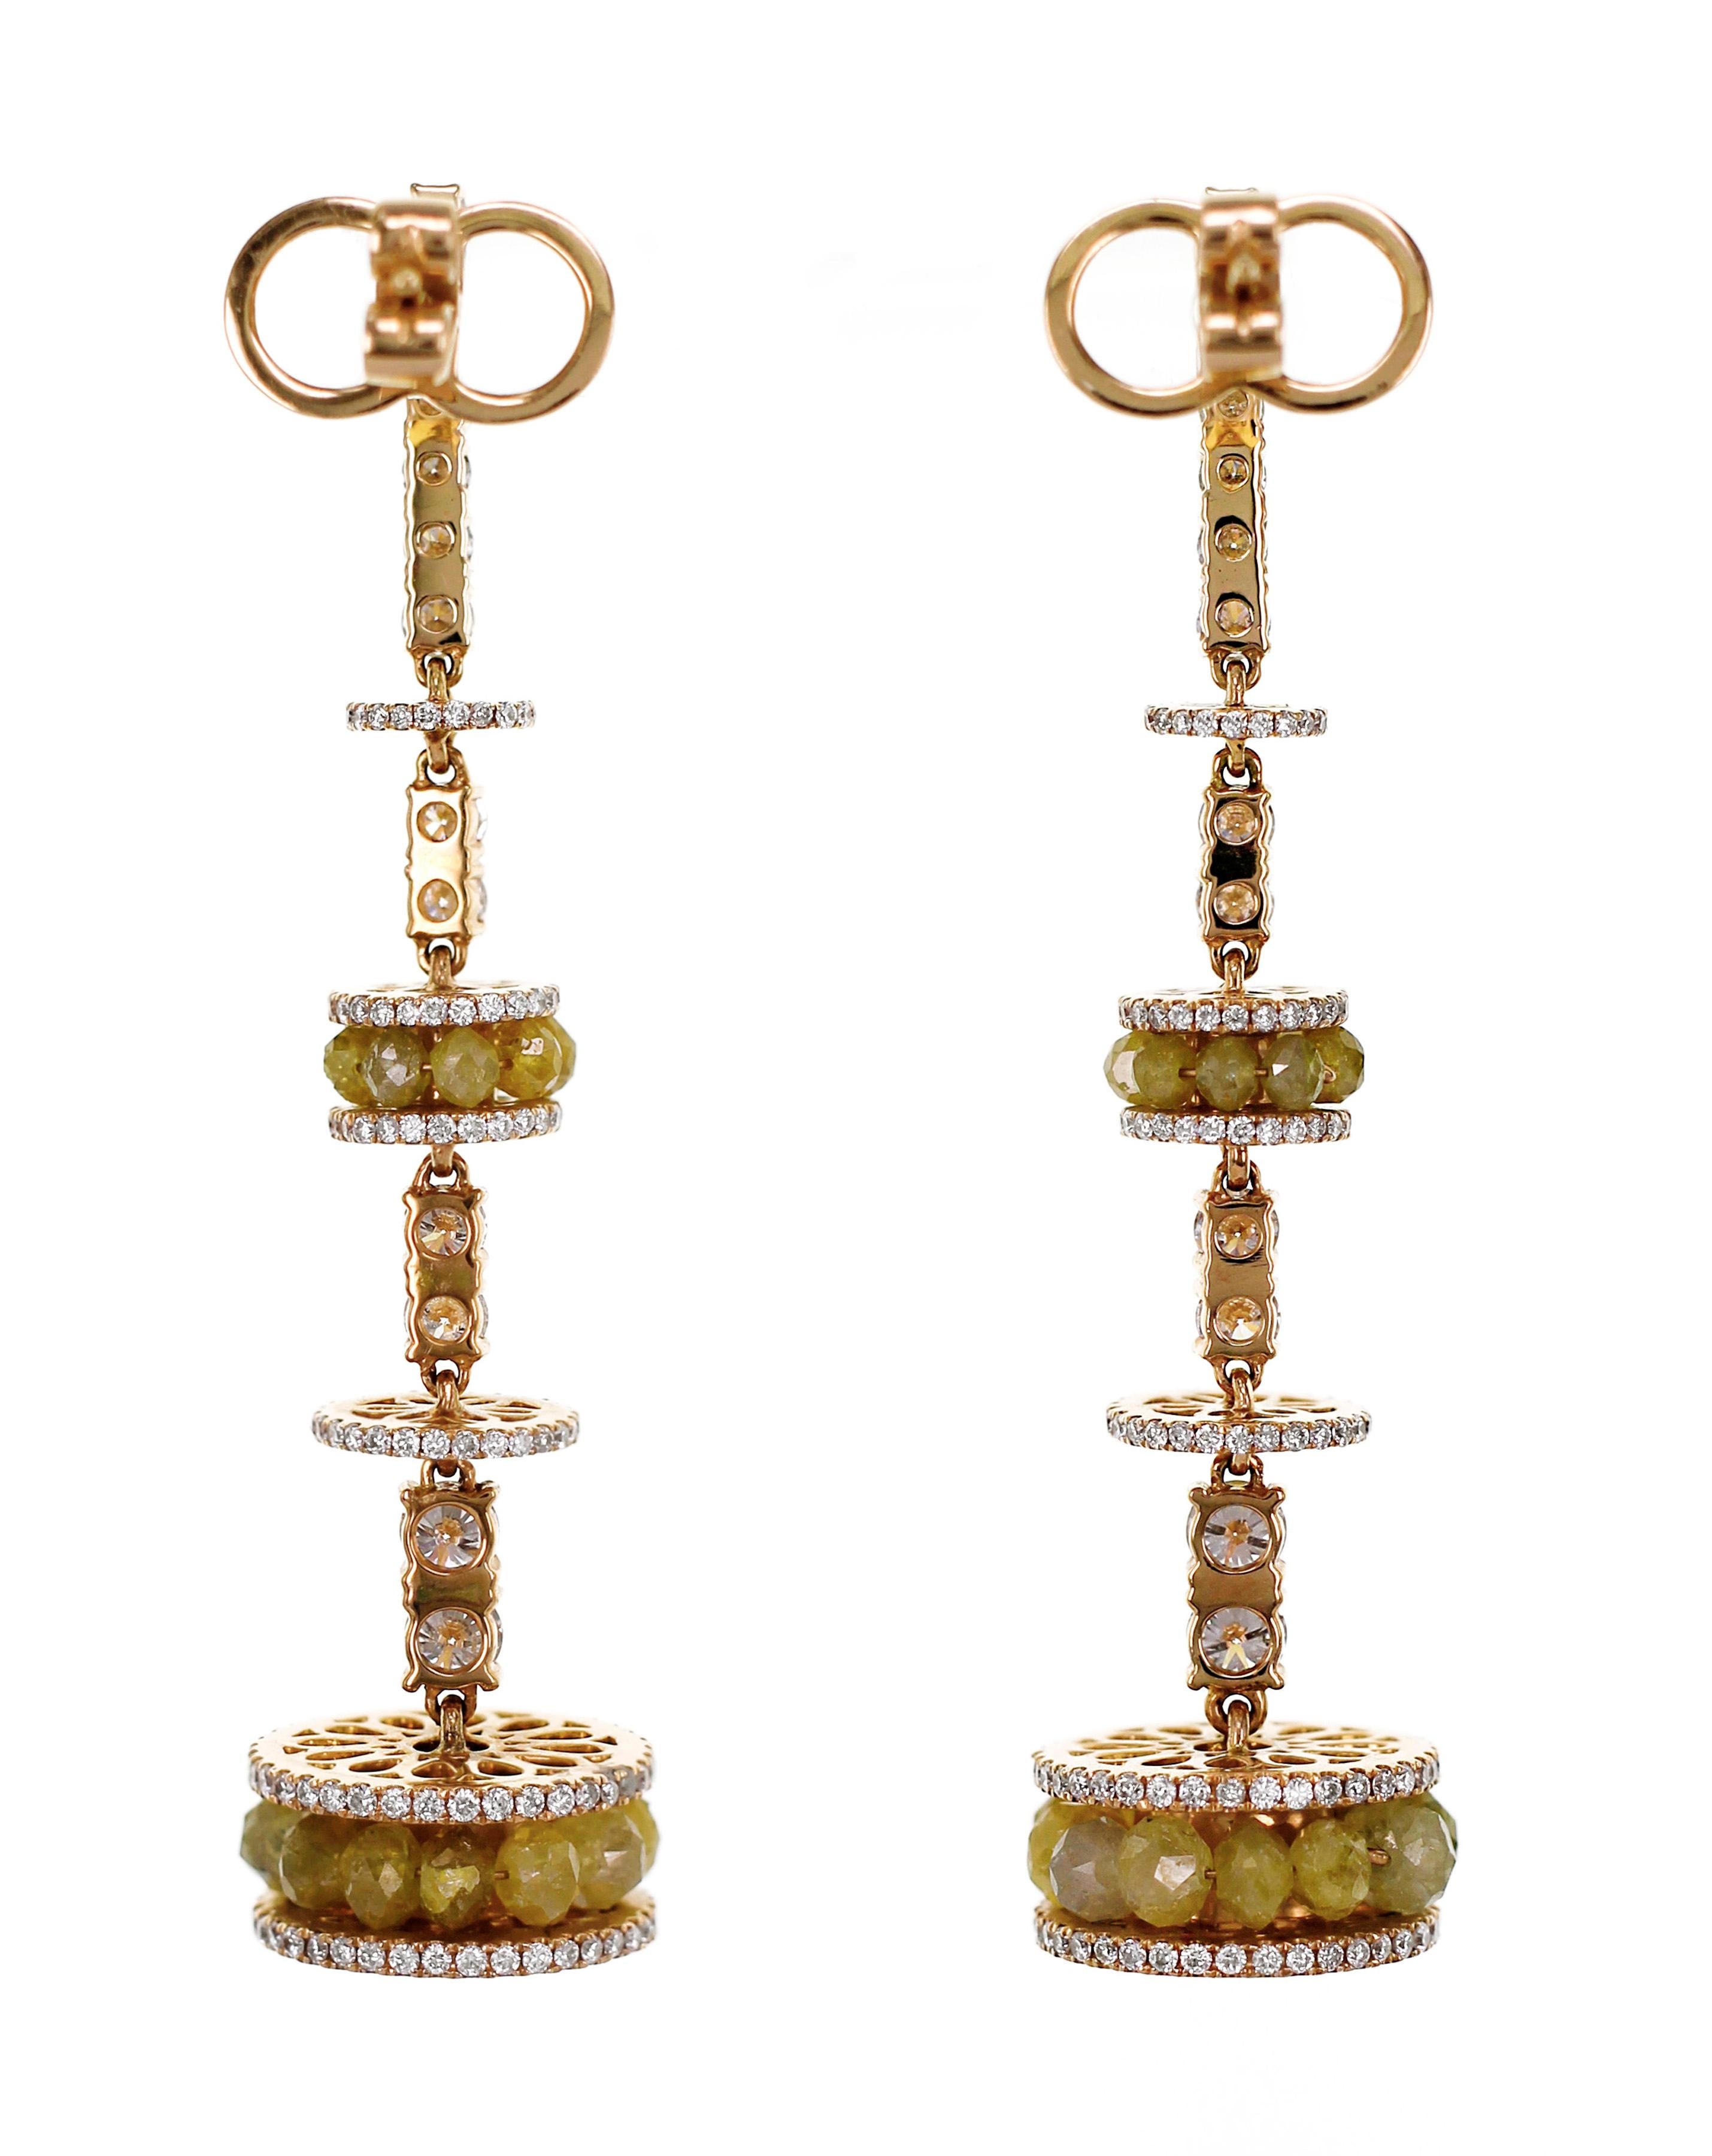 Round Cut Natural Yellow Diamond Beads and Diamond Chandelier Earring